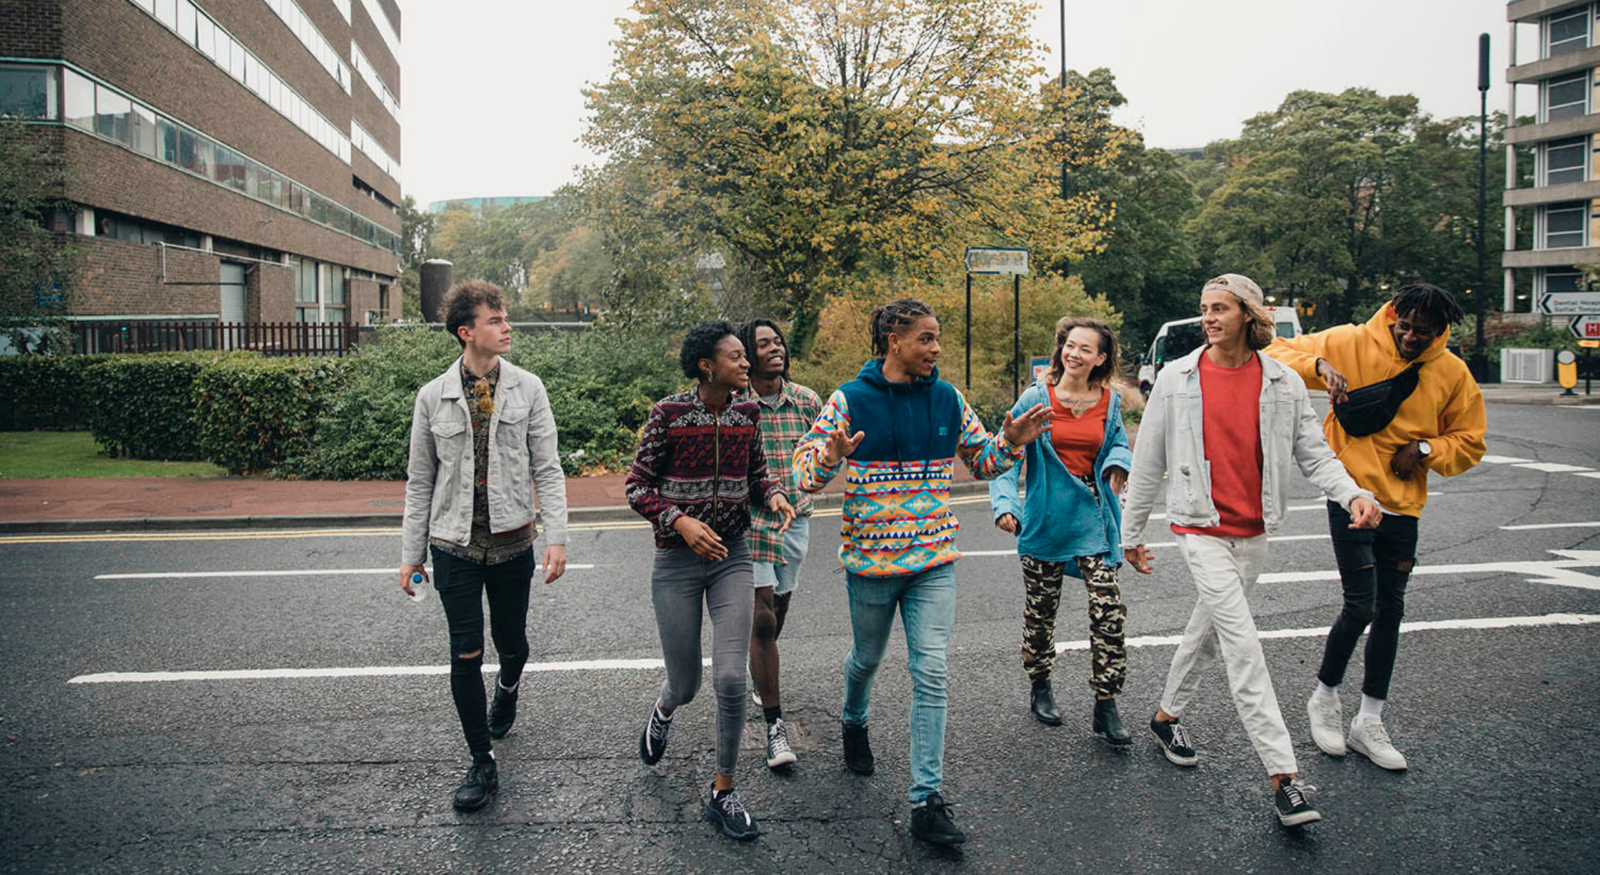 Group of happy and diverse young people walking on the street